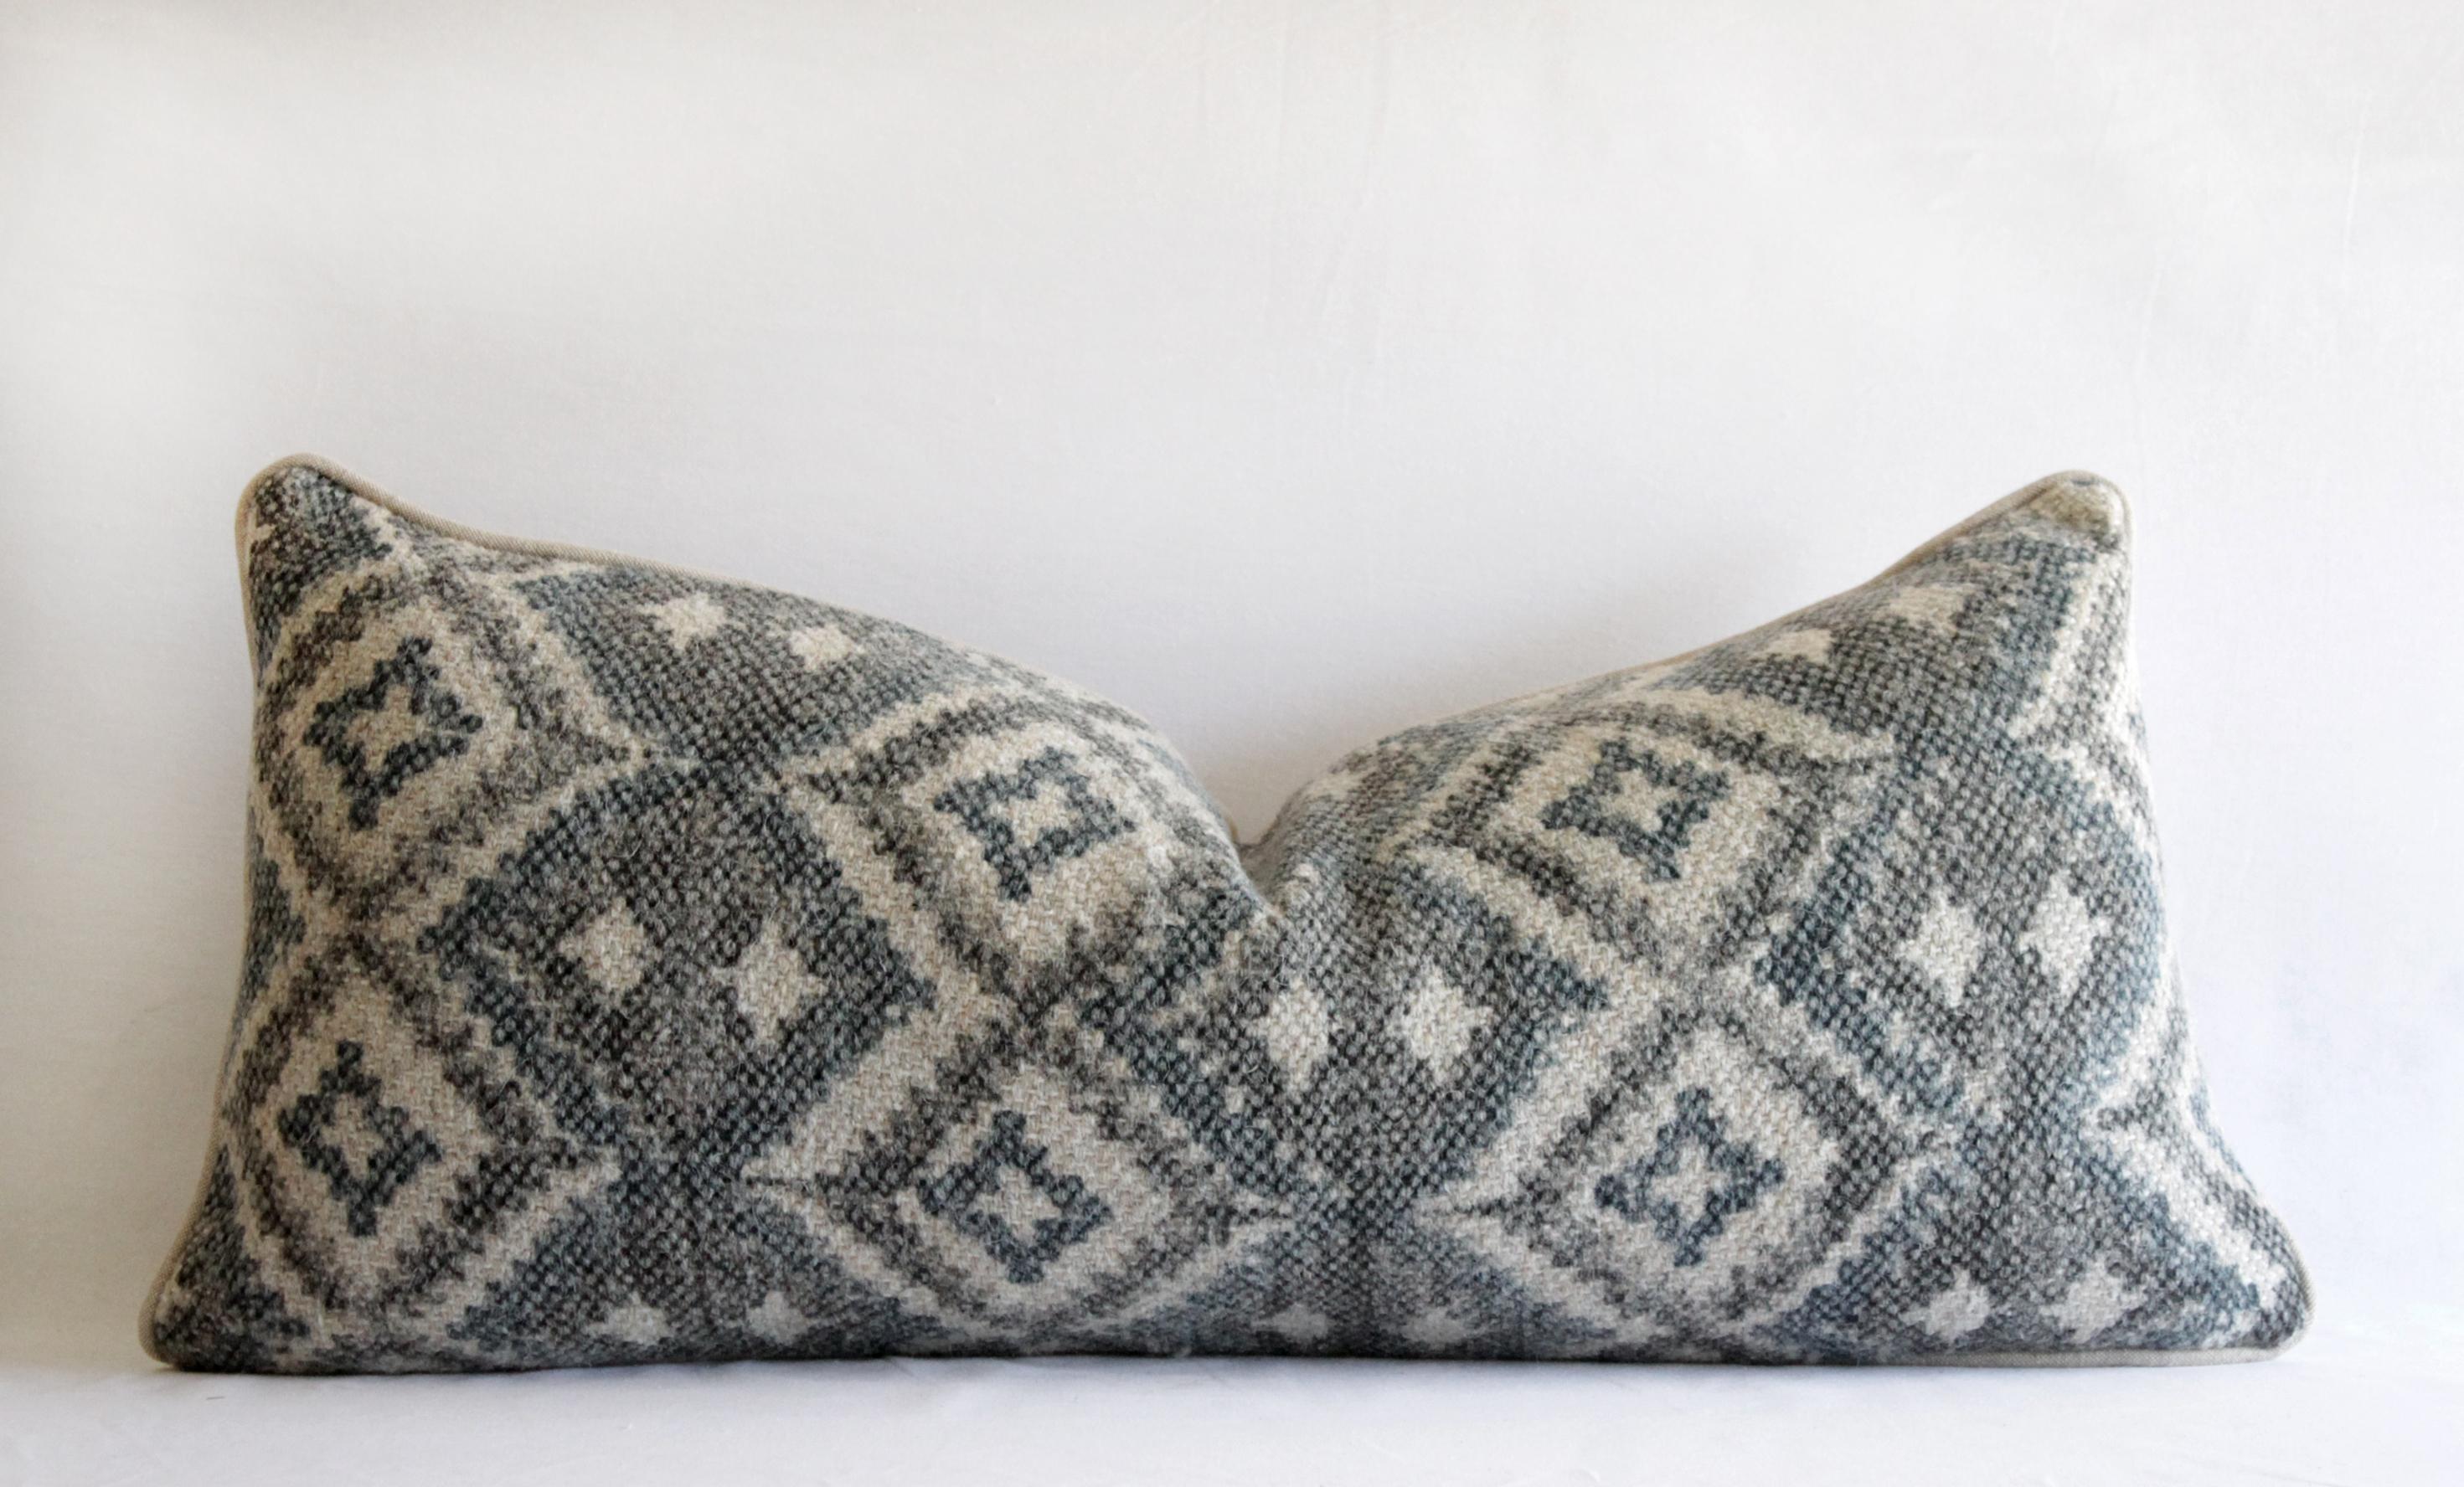 Beautiful wool lumbar pillows in a dark charcoal color, with natural and hints of indigo blue. These are new pillows made with a hidden zipper closure back, and piped edge. Insert is not included, but one can be provided for an additional